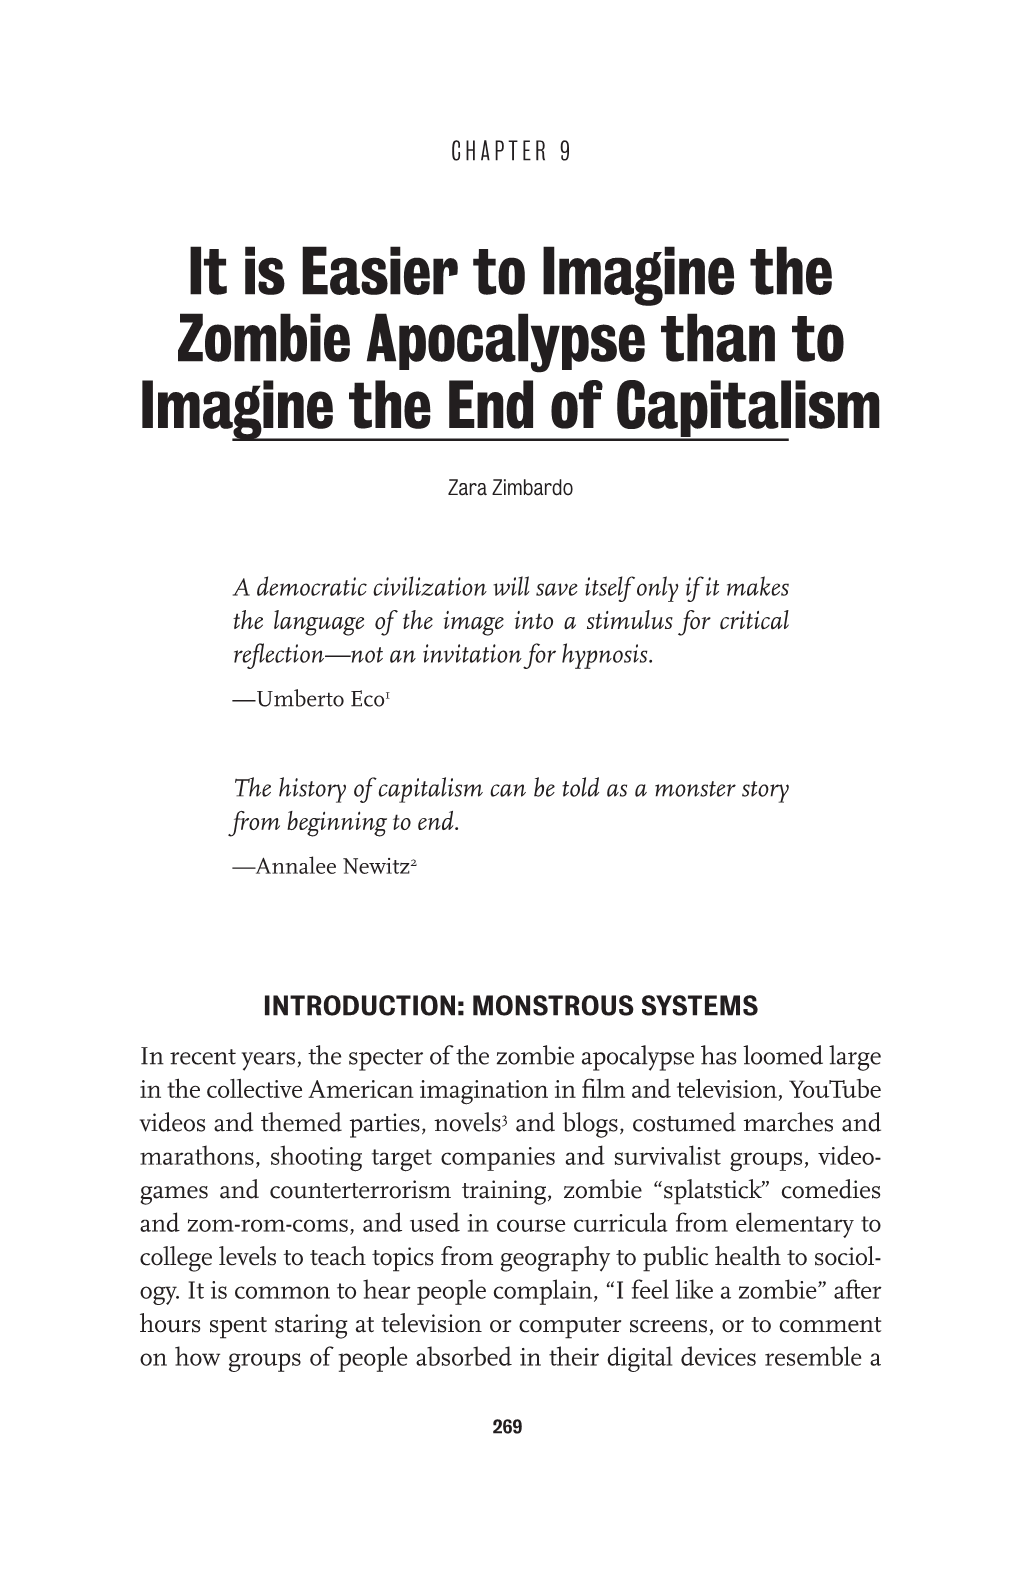 It Is Easier to Imagine the Zombie Apocalypse Than to Imagine the End of Capitalism